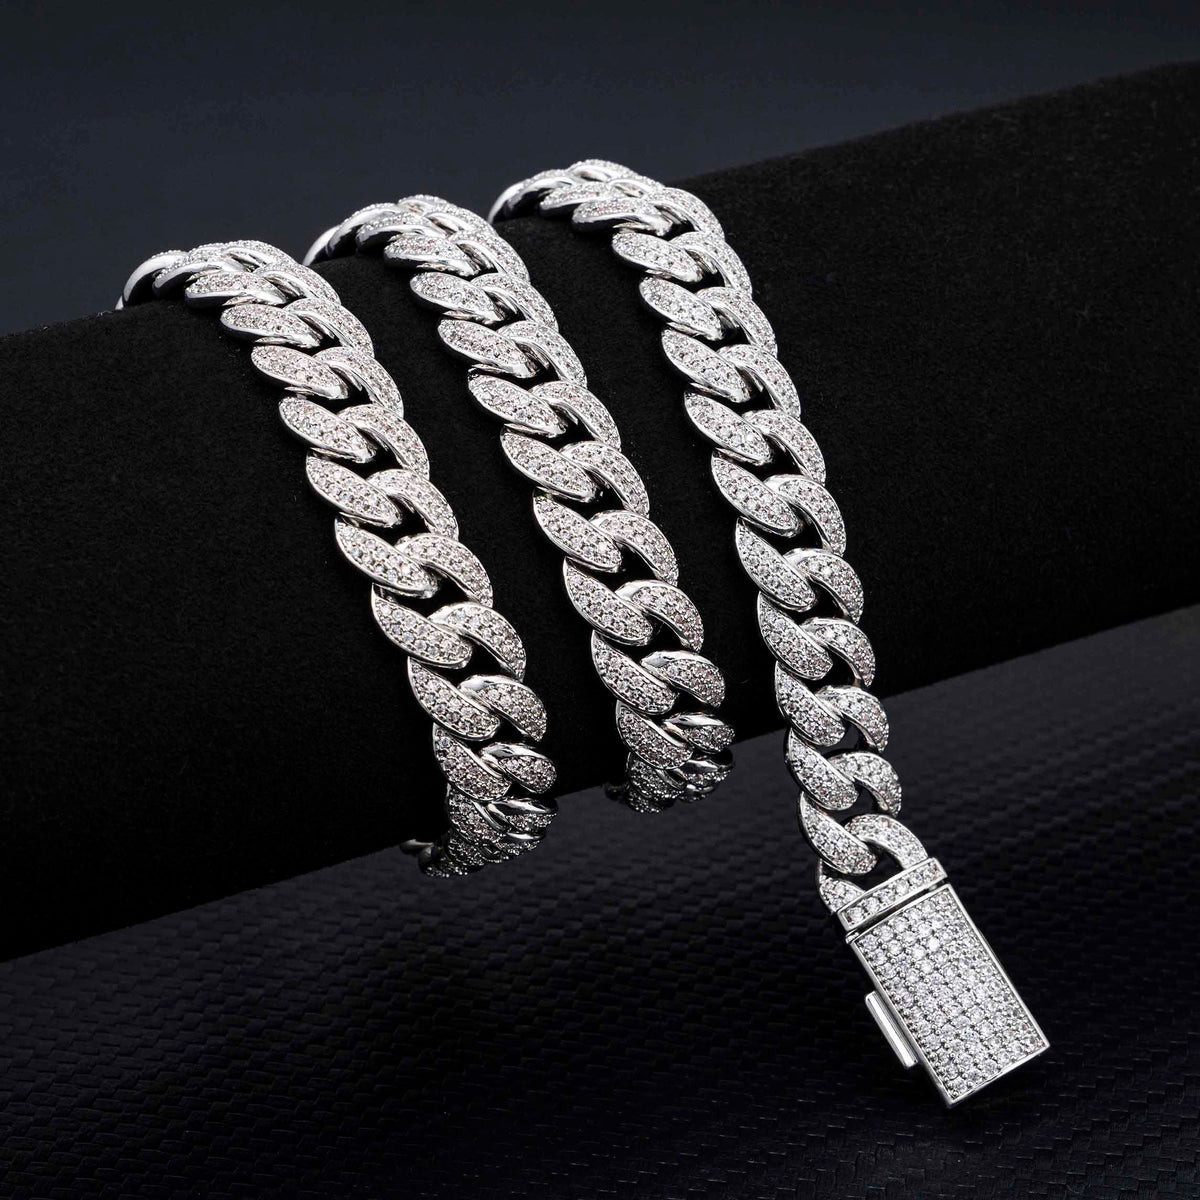 12mm diamond miami men rose 18K gold plated iced out moissanitediamond cuban link chain hip hop jewelry necklace